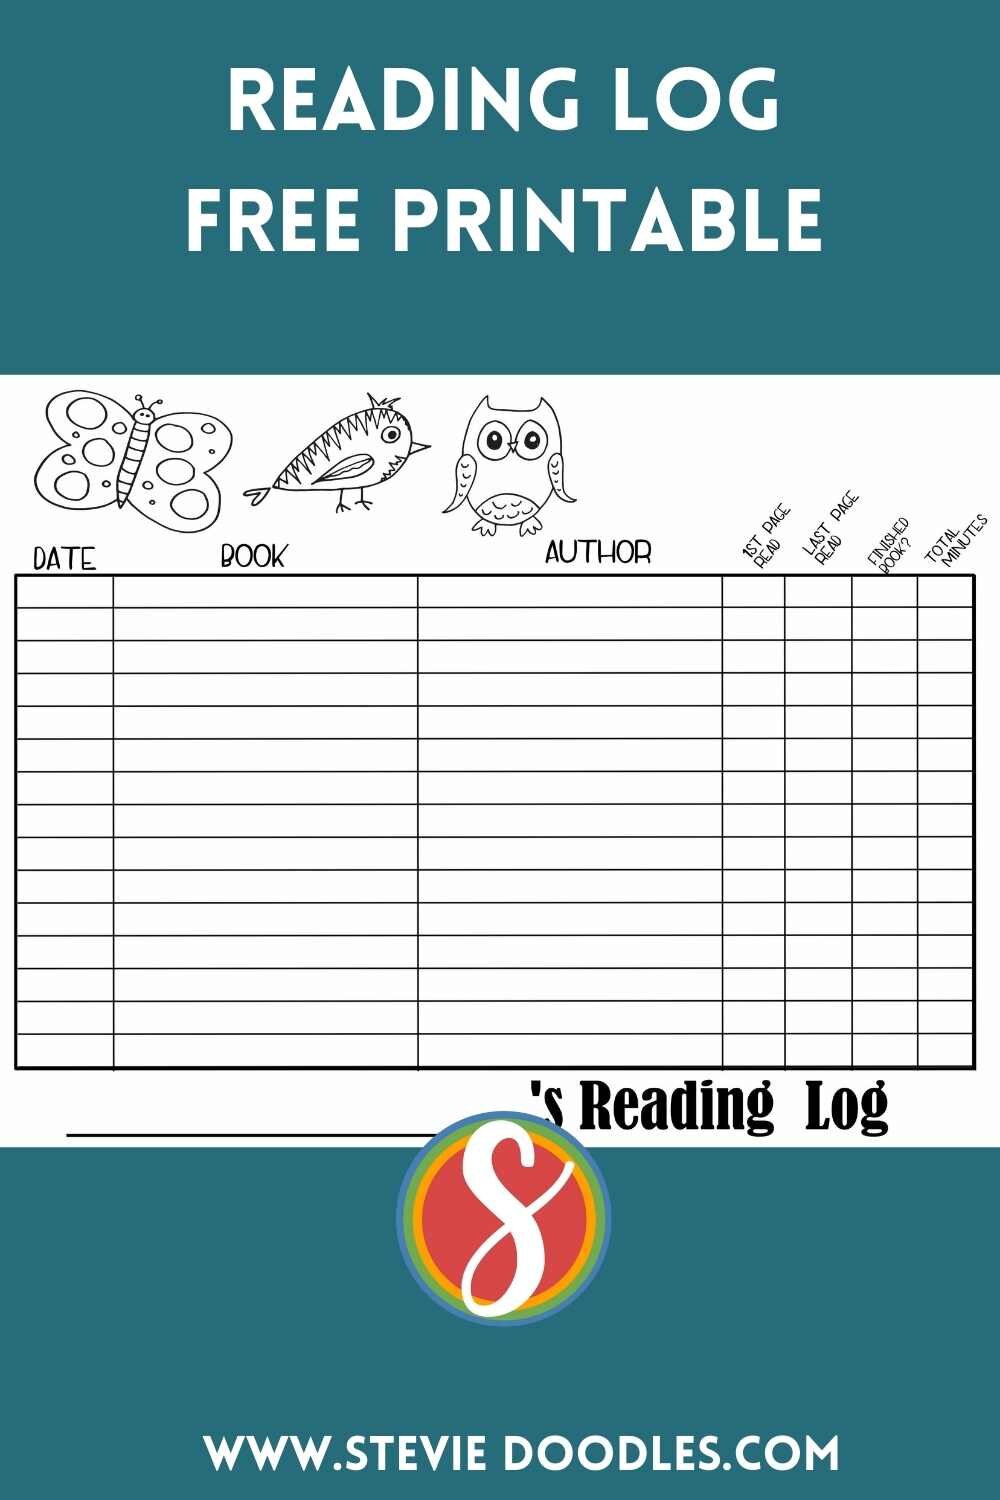 Free printable reading log from Stevie Doodles - track your reading for your reading program! 11 different styles to choose from! This one has a butterfly, a bird, and an owl - which of course is also a bird, but that’s beside the point. The point i…